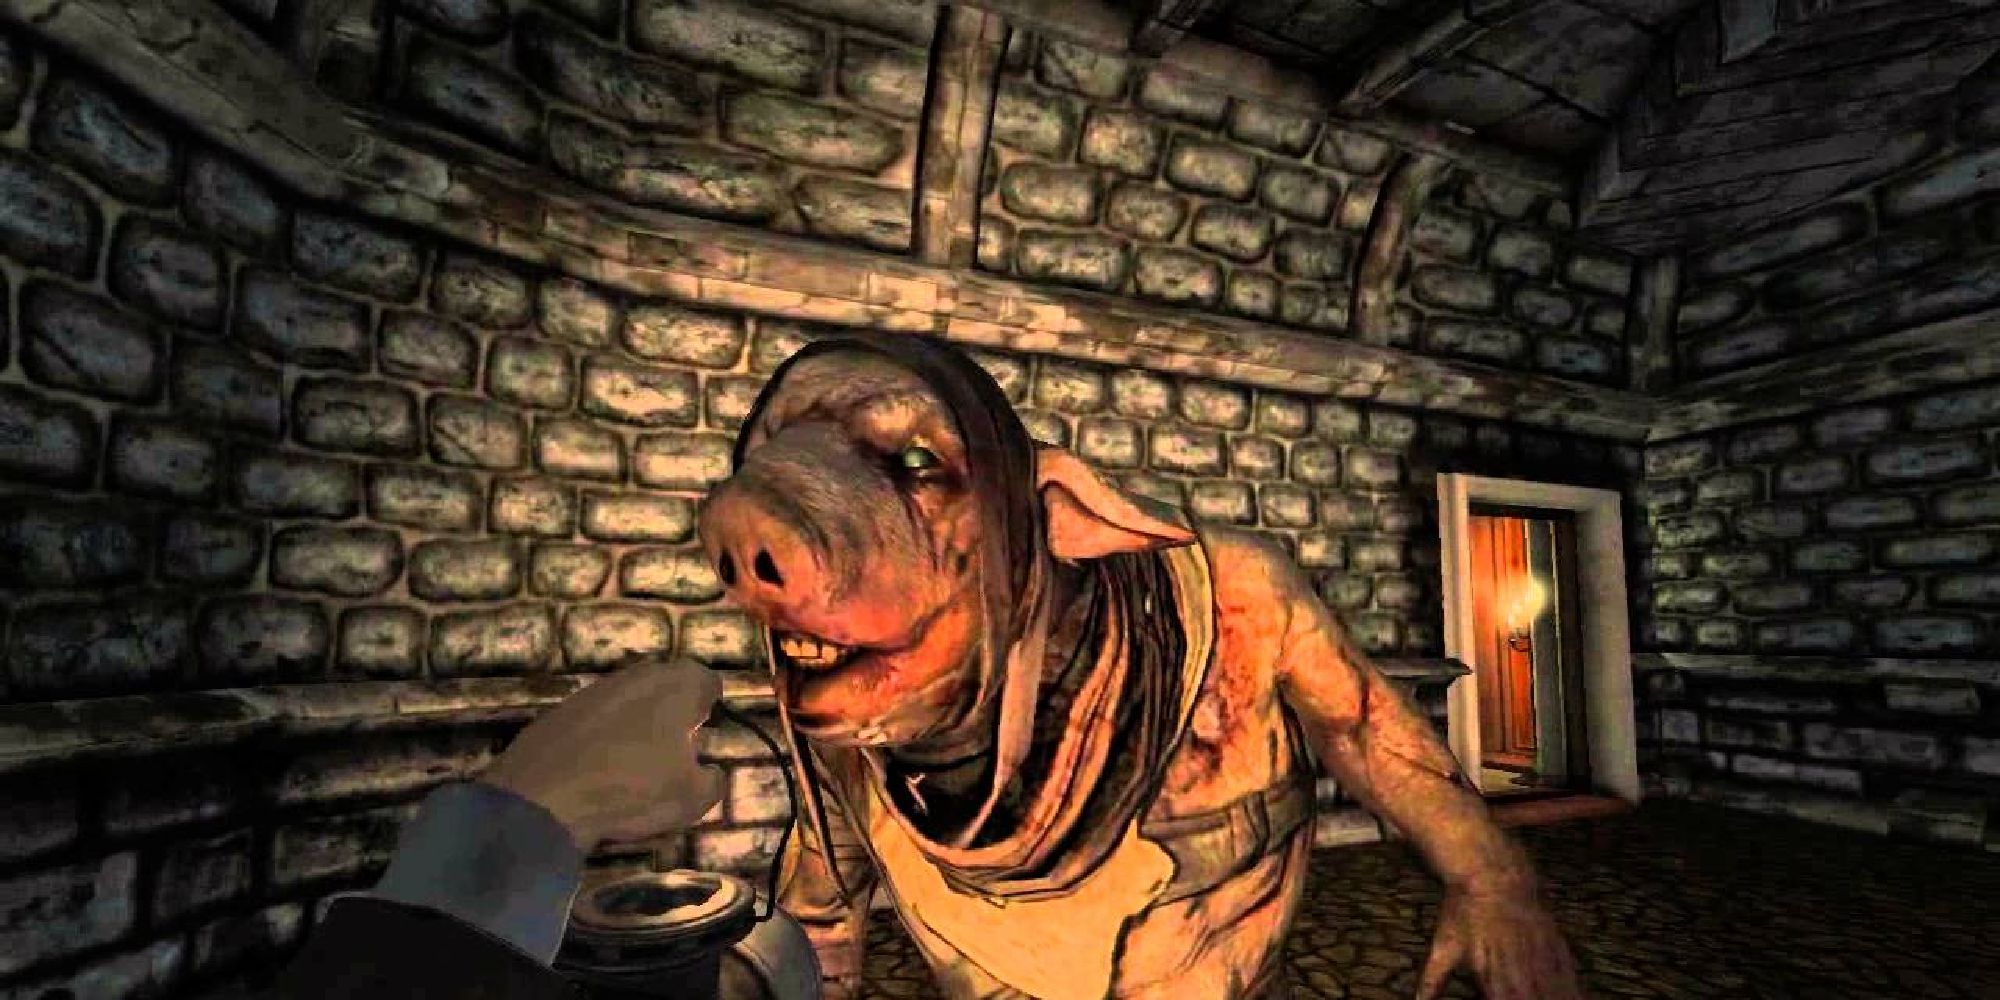 The player holds up a lantern, illuminating the stone corridor and the pig monster they have come face to face with. 